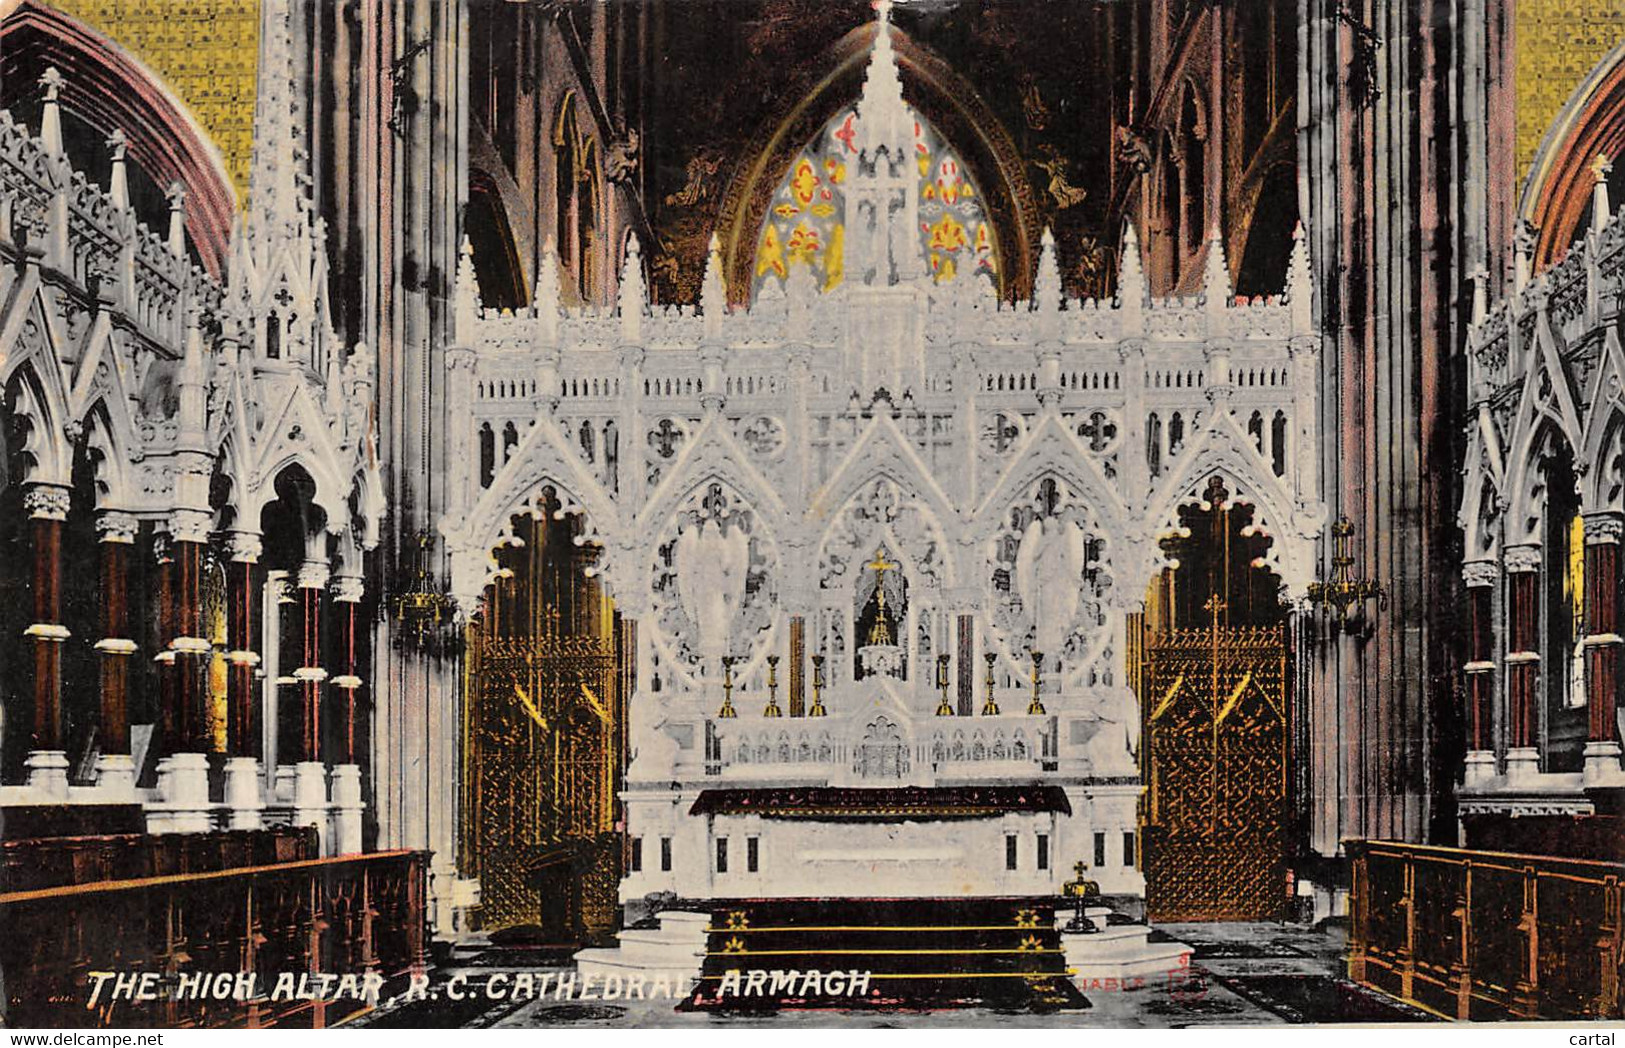 ARMAGH - The High Altar, R.C. Cathedral - Armagh